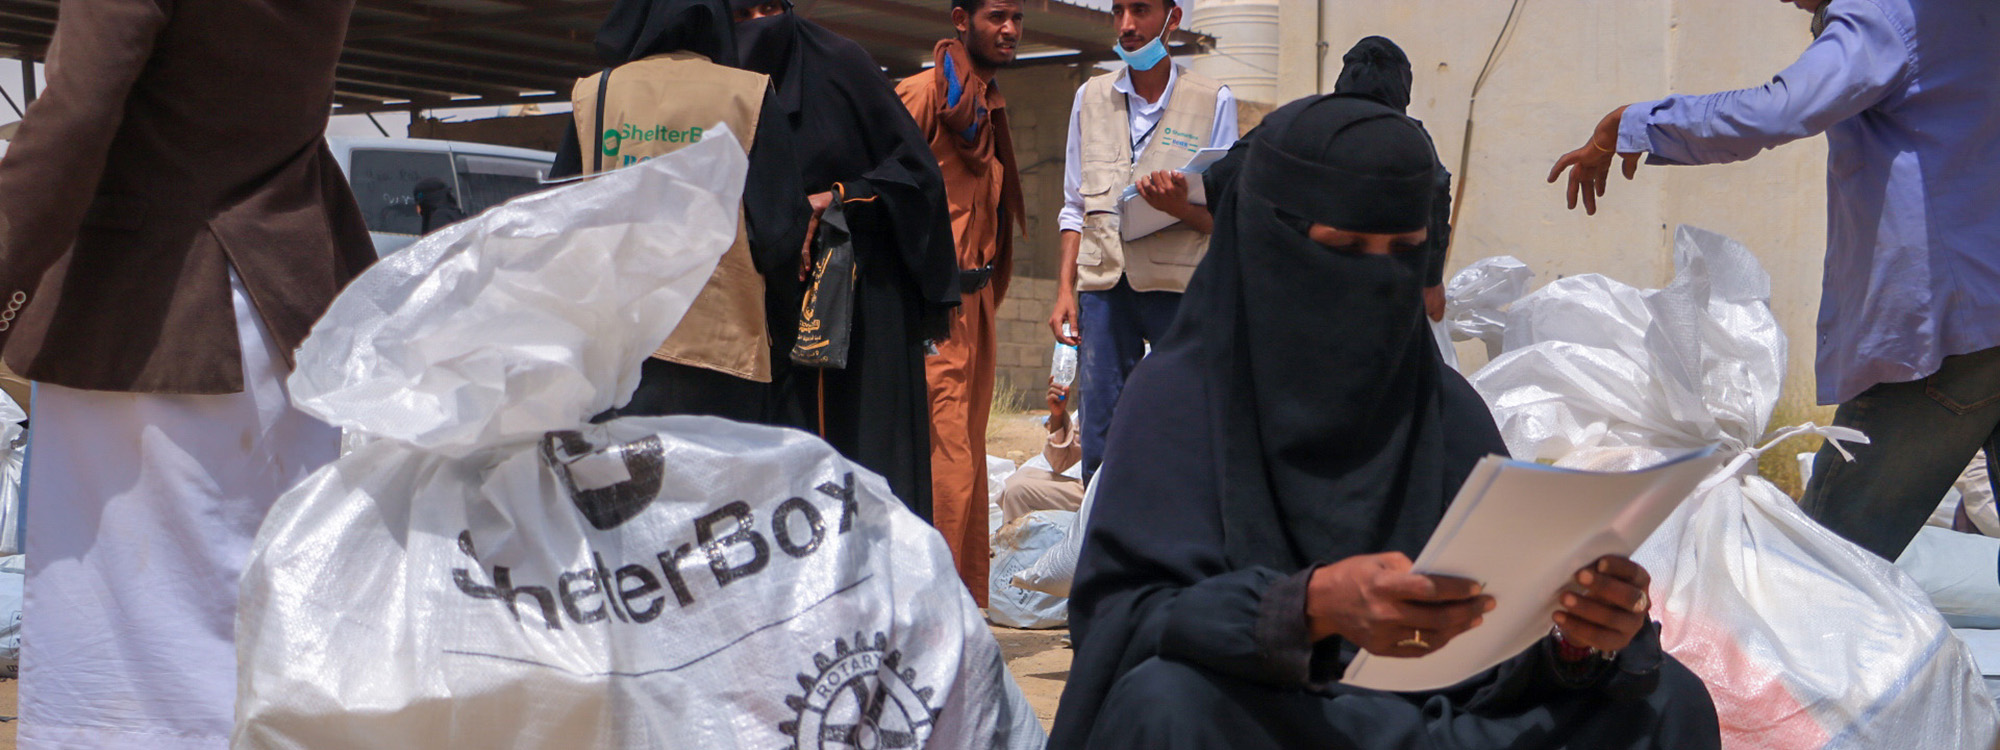 Woman reading a piece of paper sitting next to a bag of aid from ShelterBox in Yemen